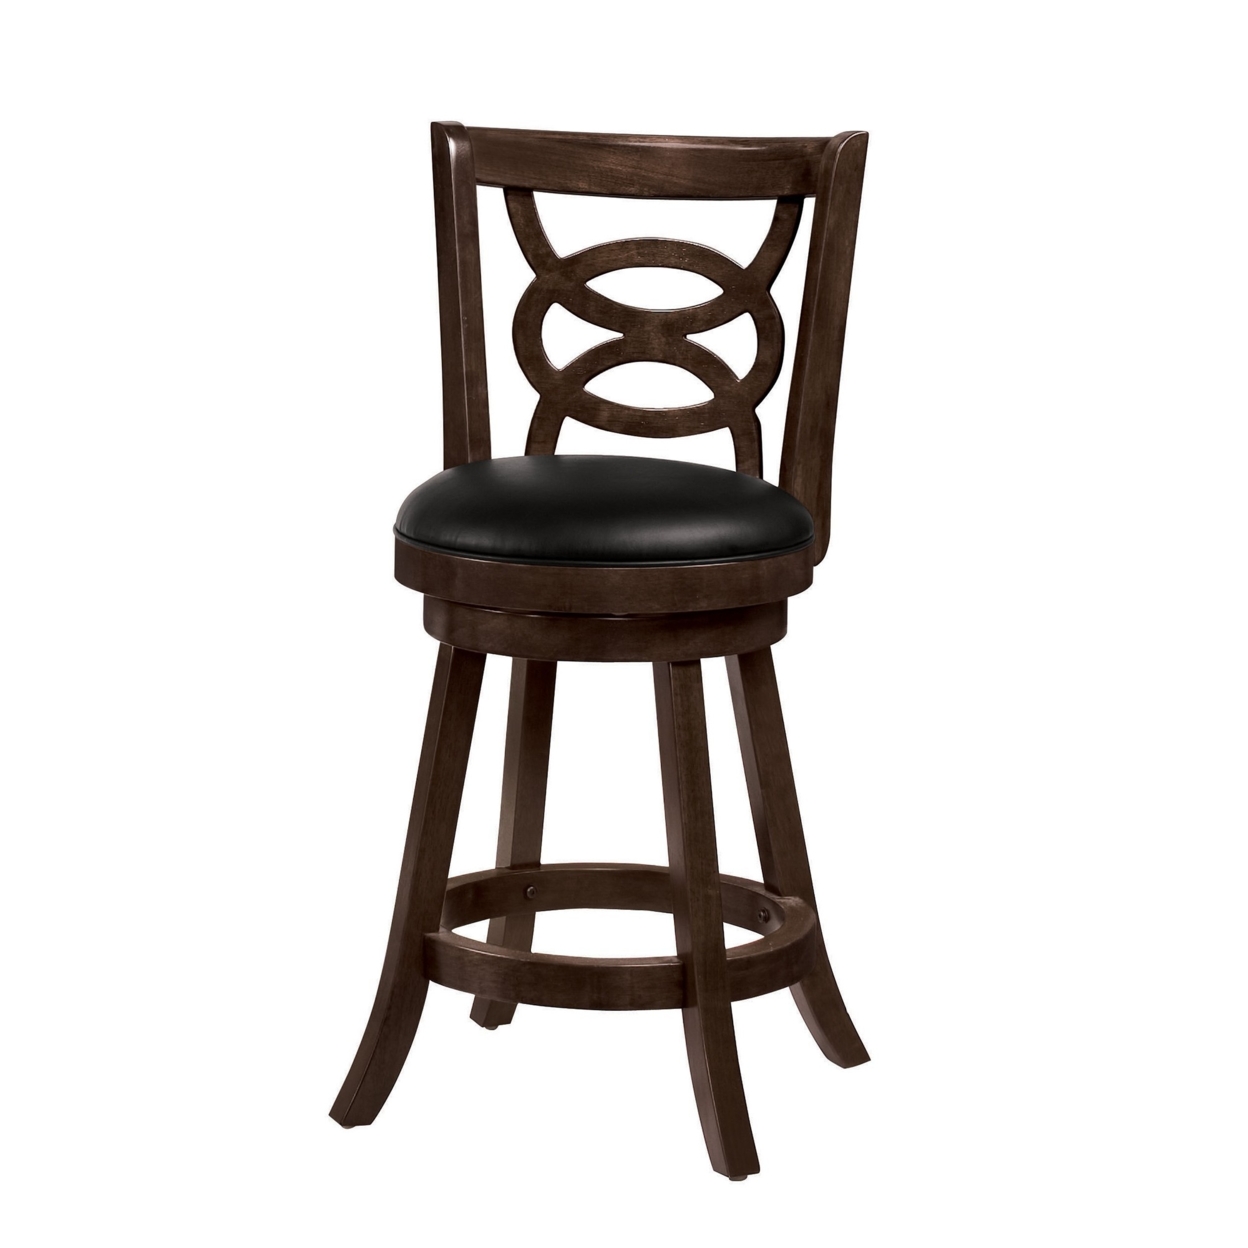 Comfortable Counter Height Stool Upholstered Seat, Black And Brown, Set Of 2- Saltoro Sherpi